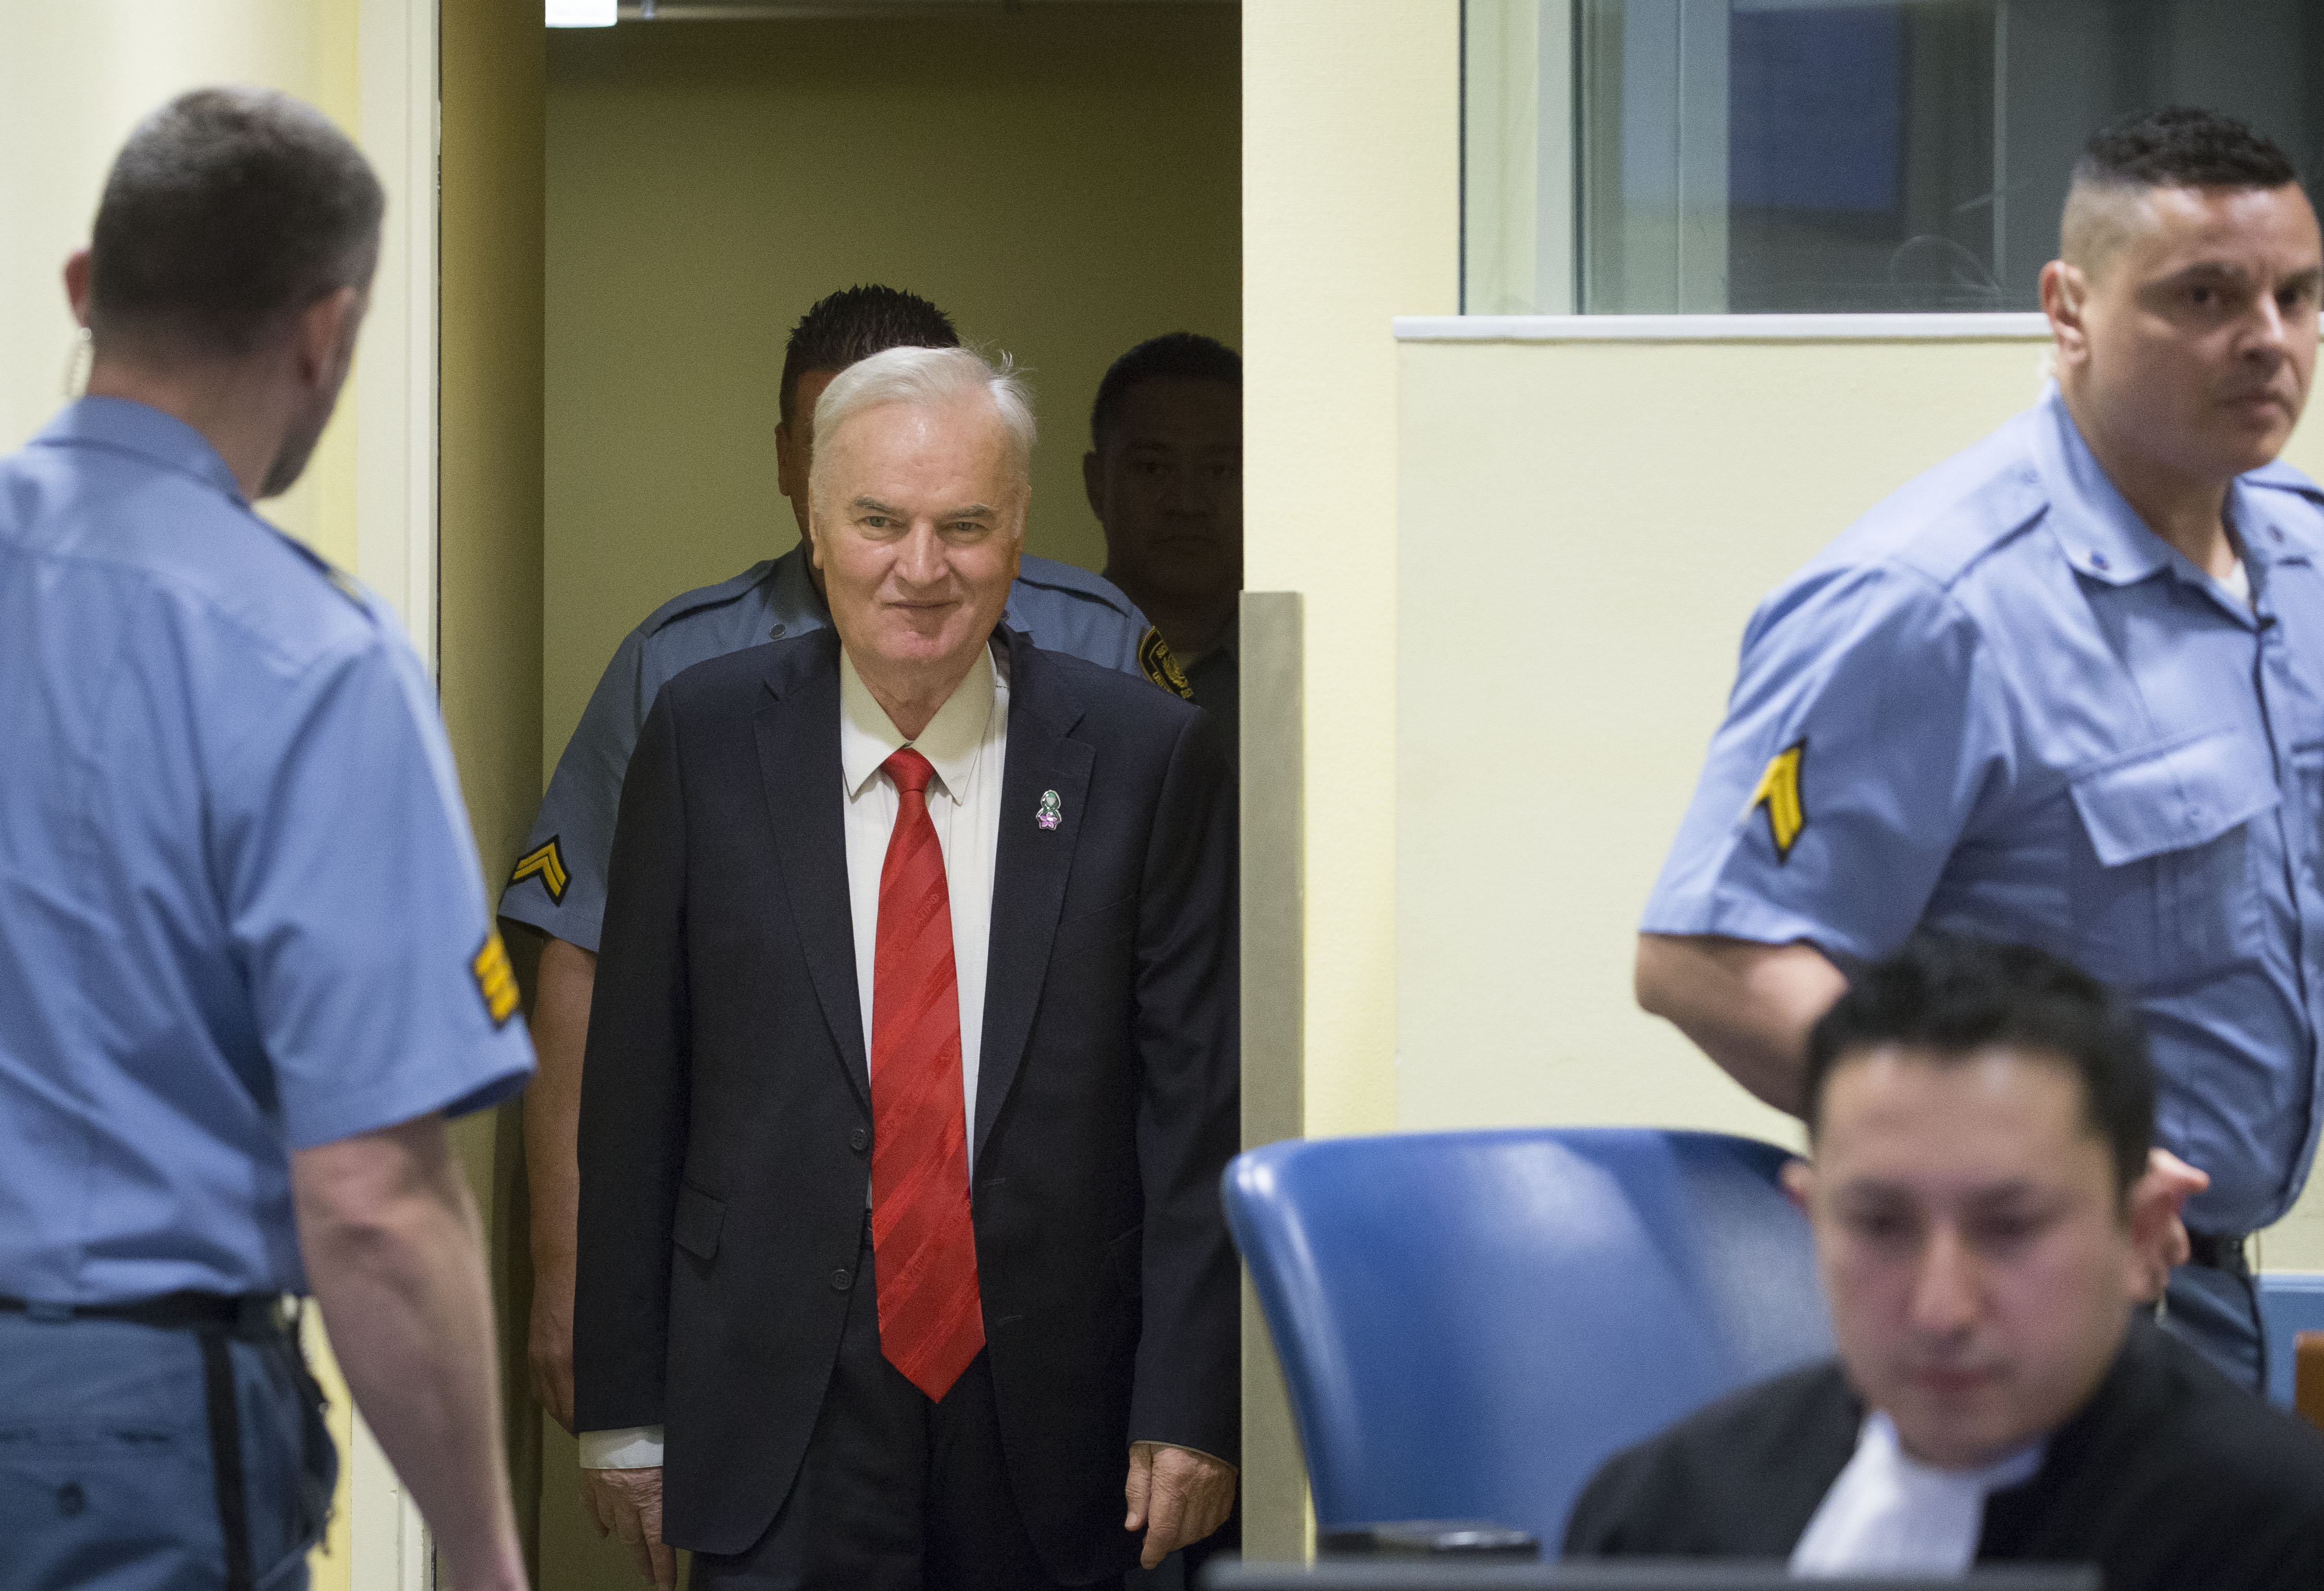 Former Bosnian military chief Ratko Mladic appears for the pronouncement of the Trial Judgement for the International Criminal Tribunal for the former Yugoslavia (ICTY). Mladic is dubbed the 